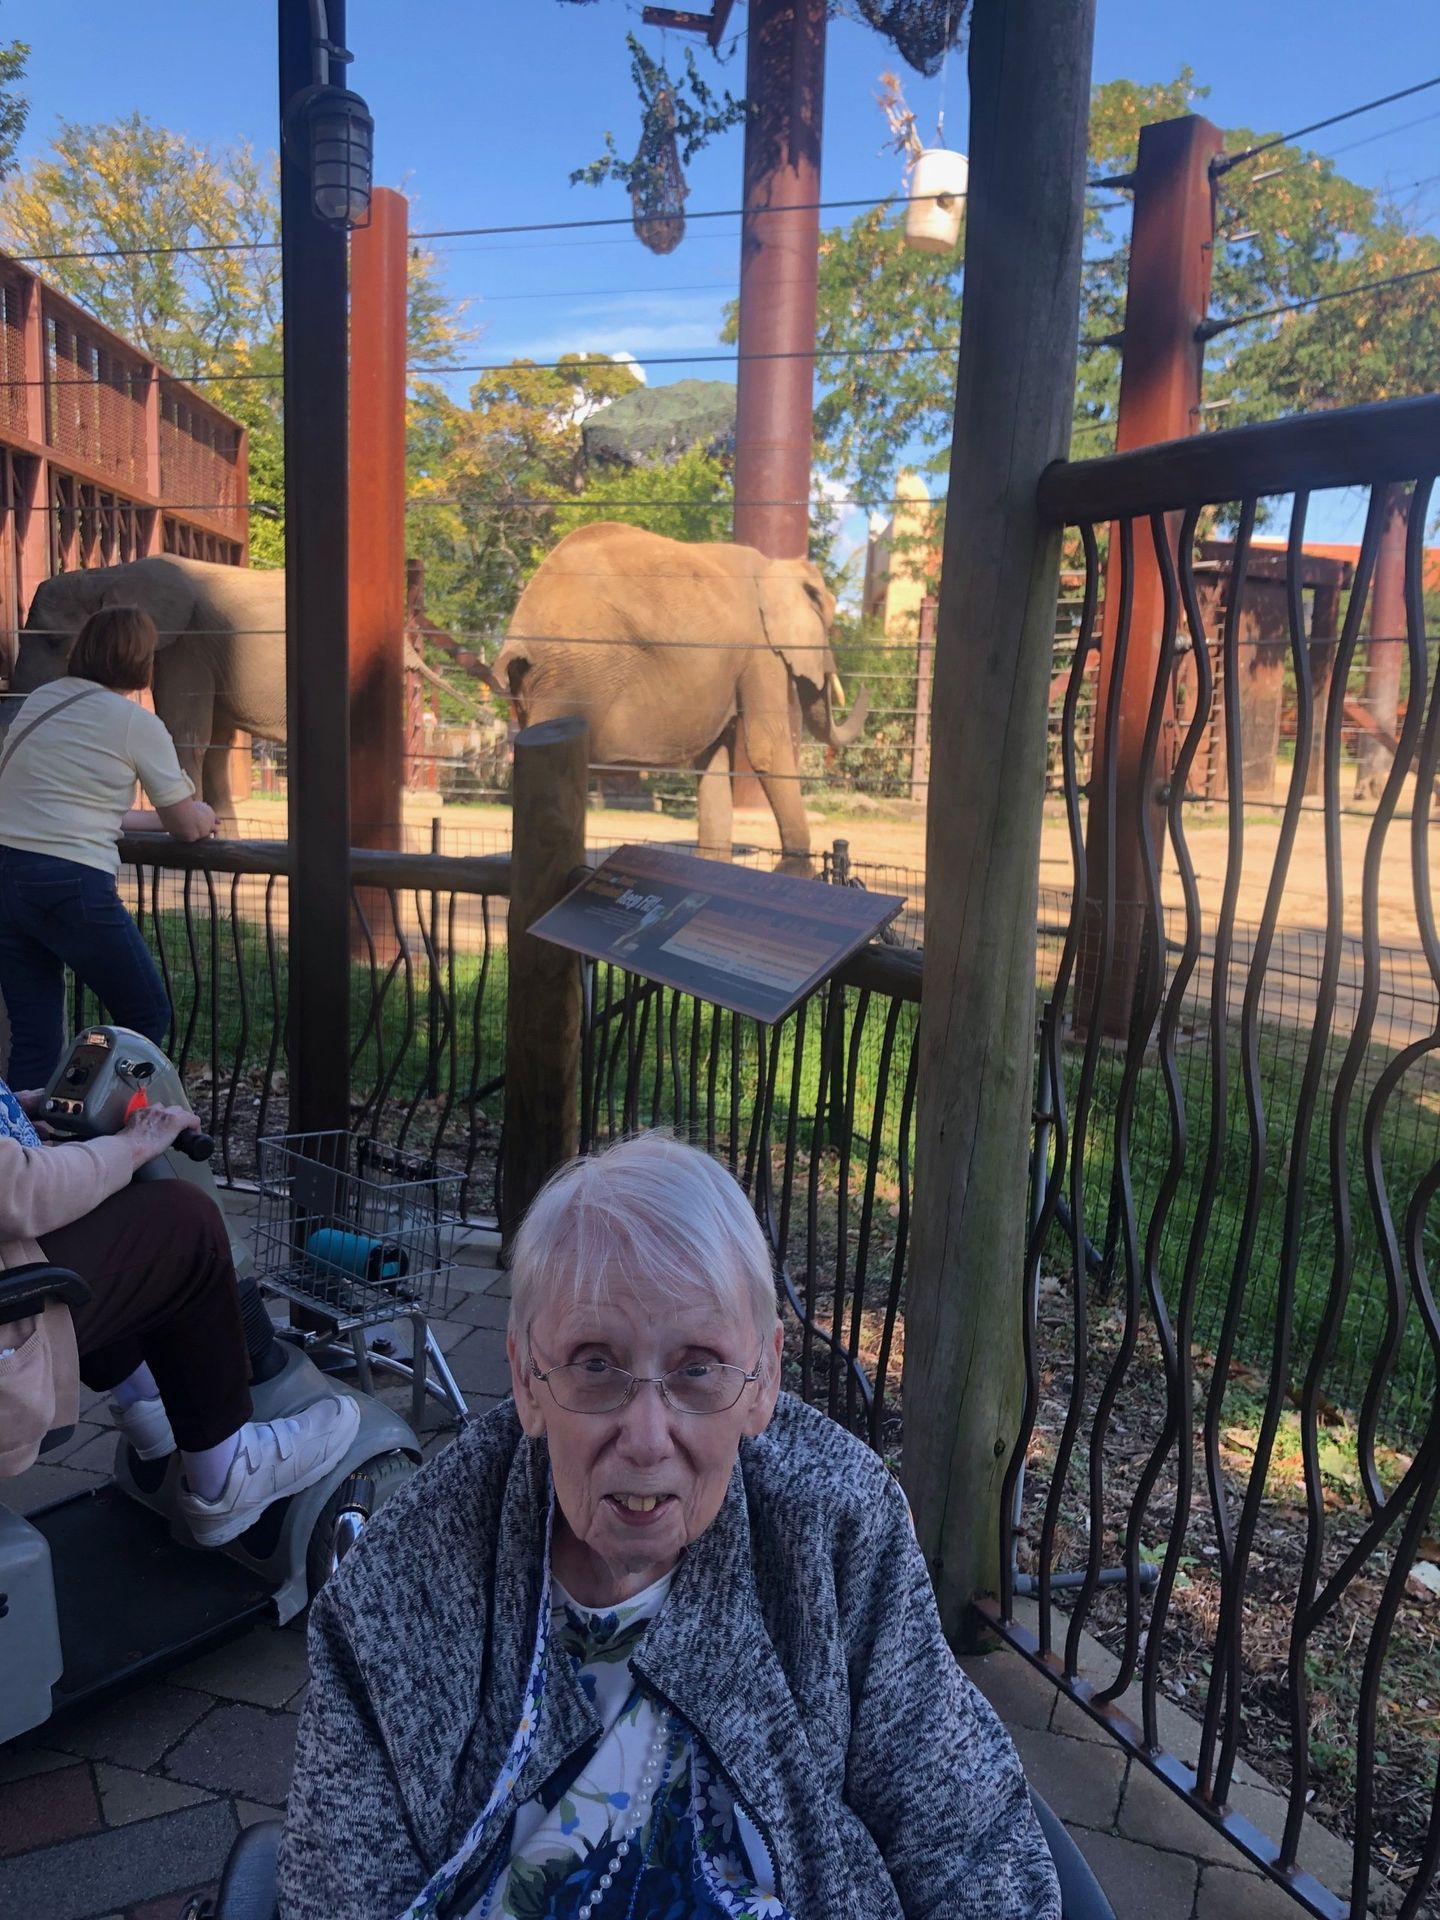 Elder posing next to elephants during outing at Toledo Zoo at Lenawee Medical Care Facility in Adrian, MI